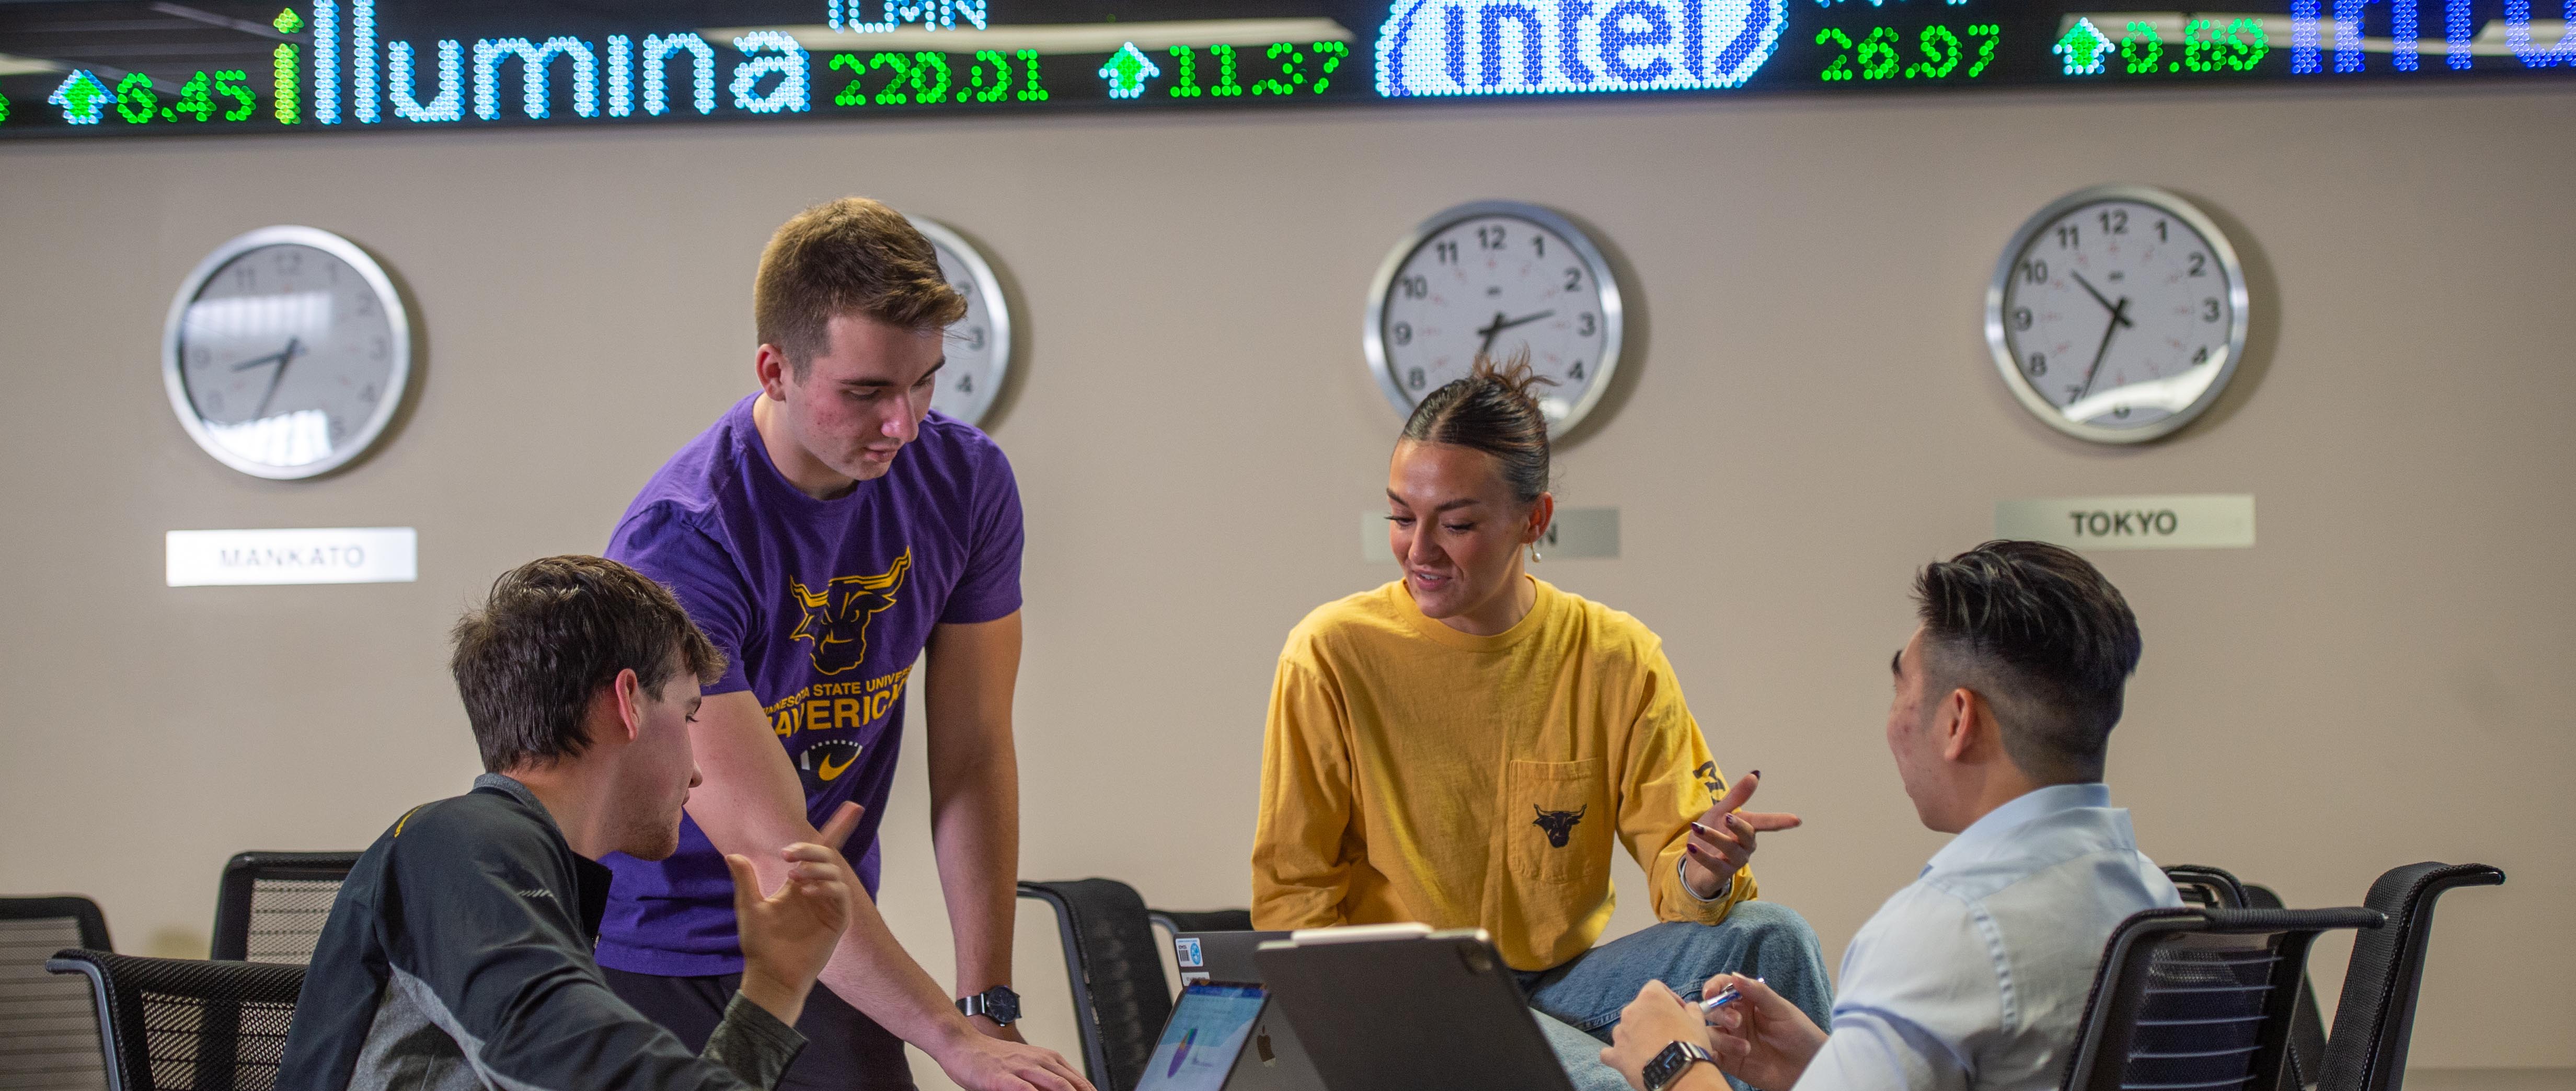 image of four students working together in front of the finance ticker